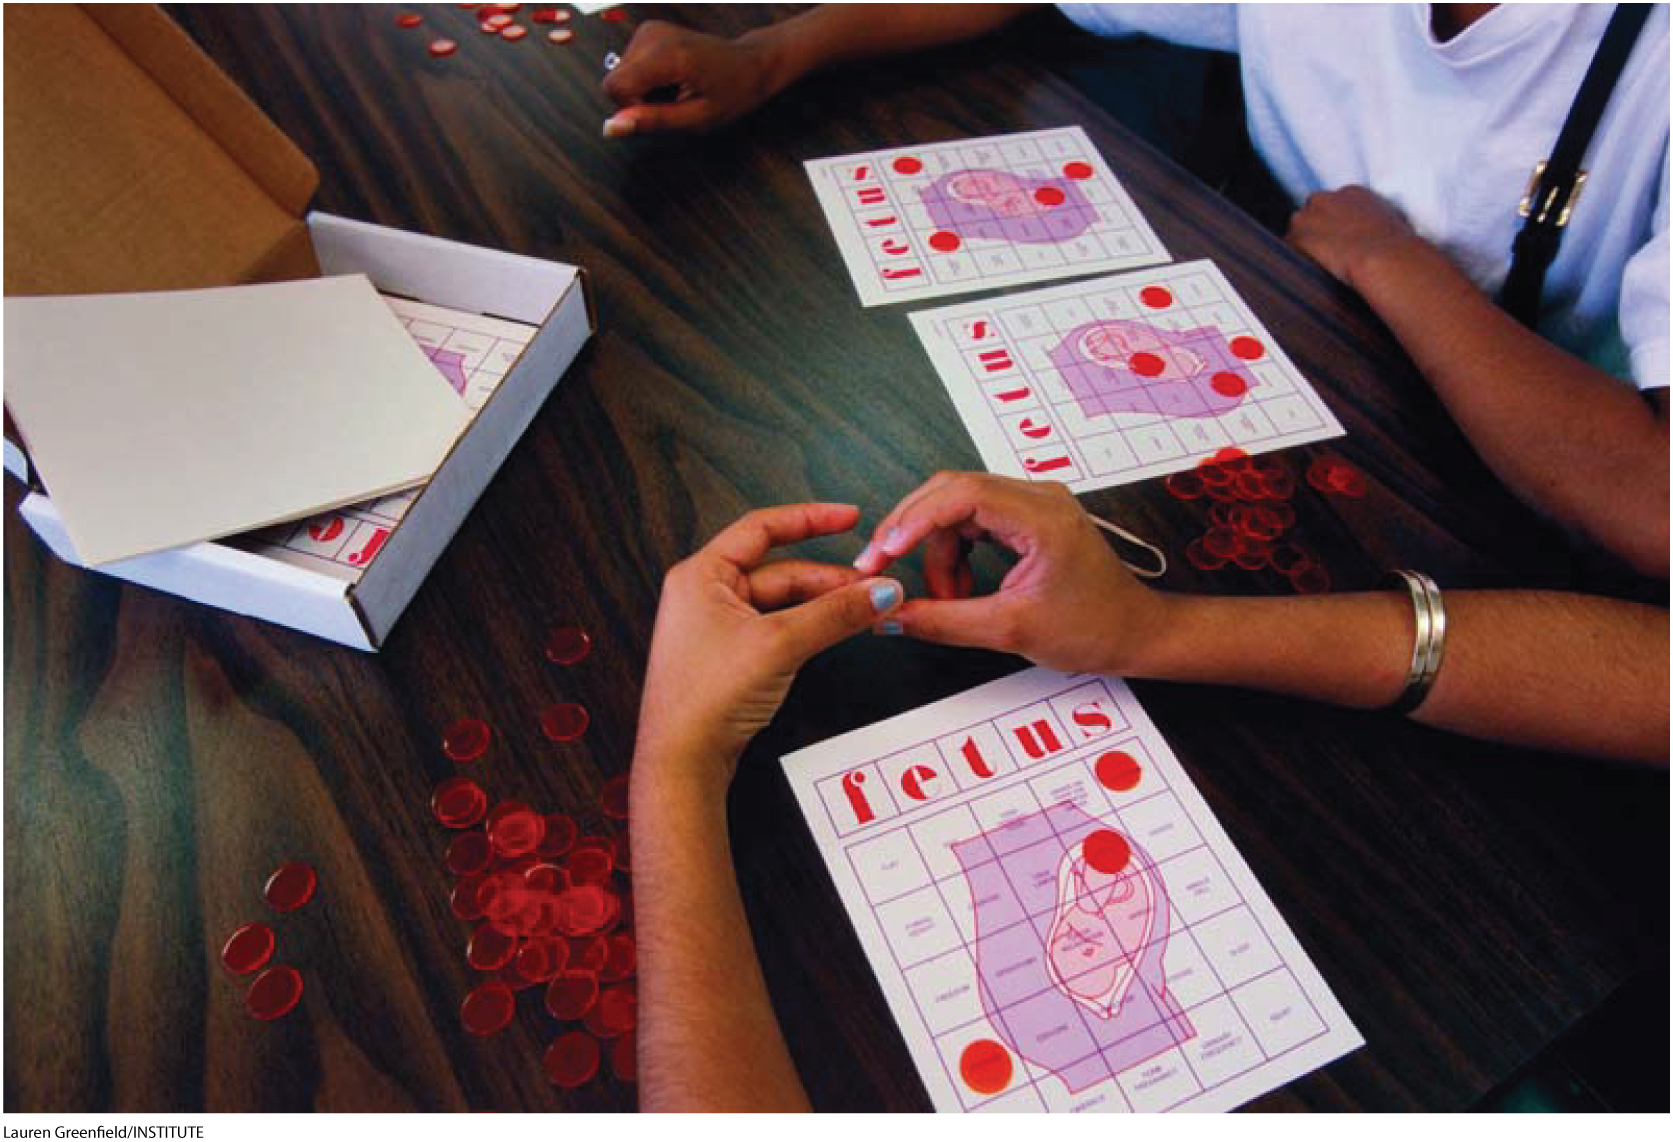 A photo shows people playing a board game like Bingo, except this one is called Fetus.